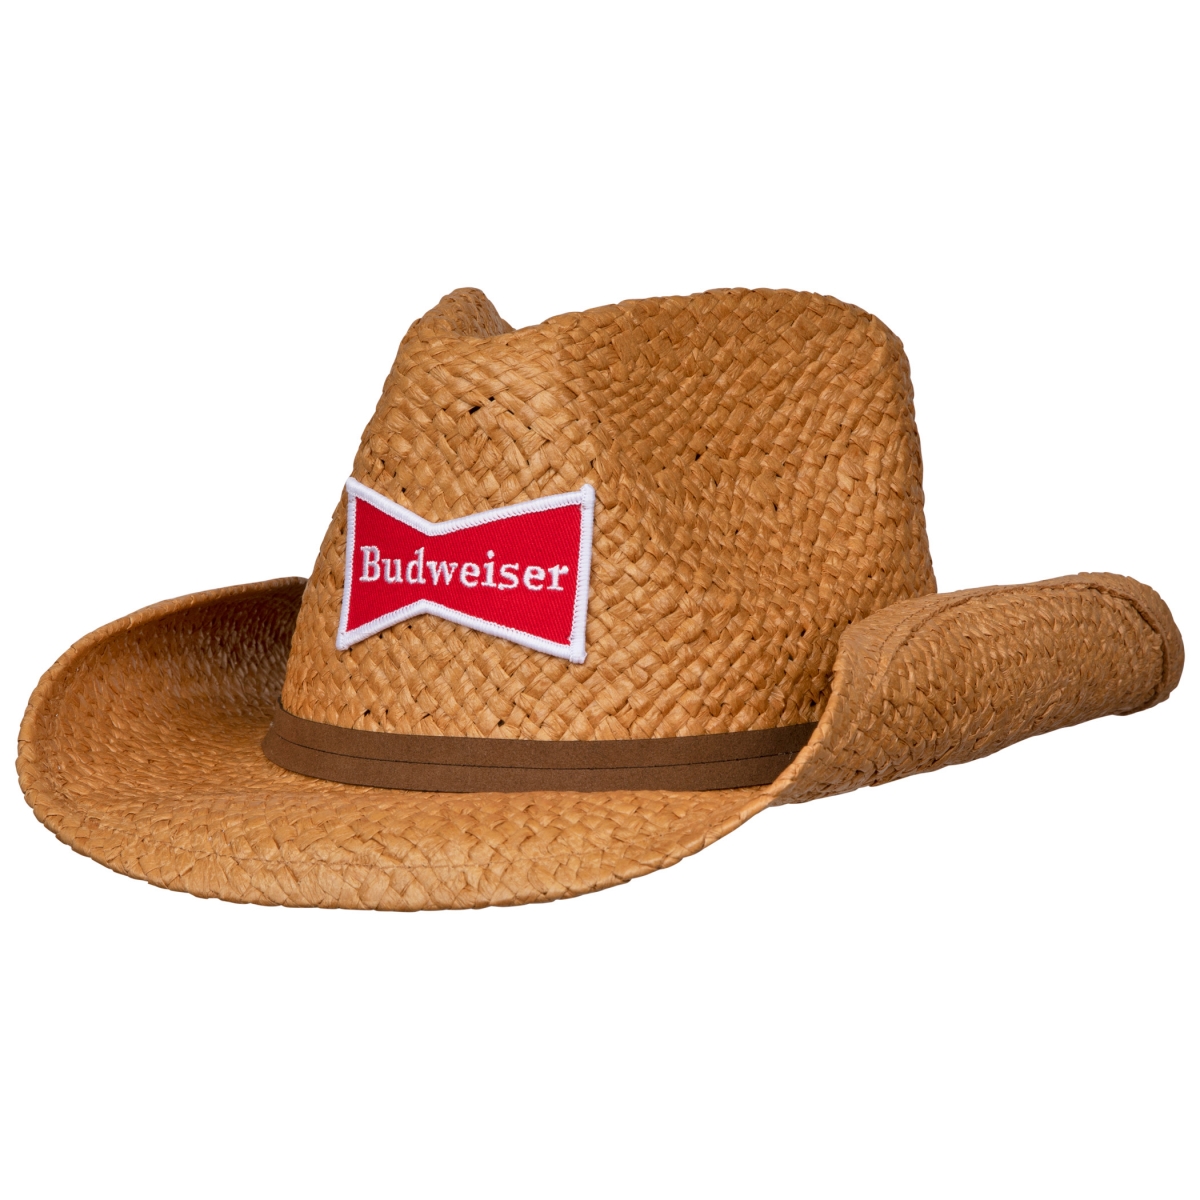 Budweiser 817726 Straw Cowboy Hat with Brown Band